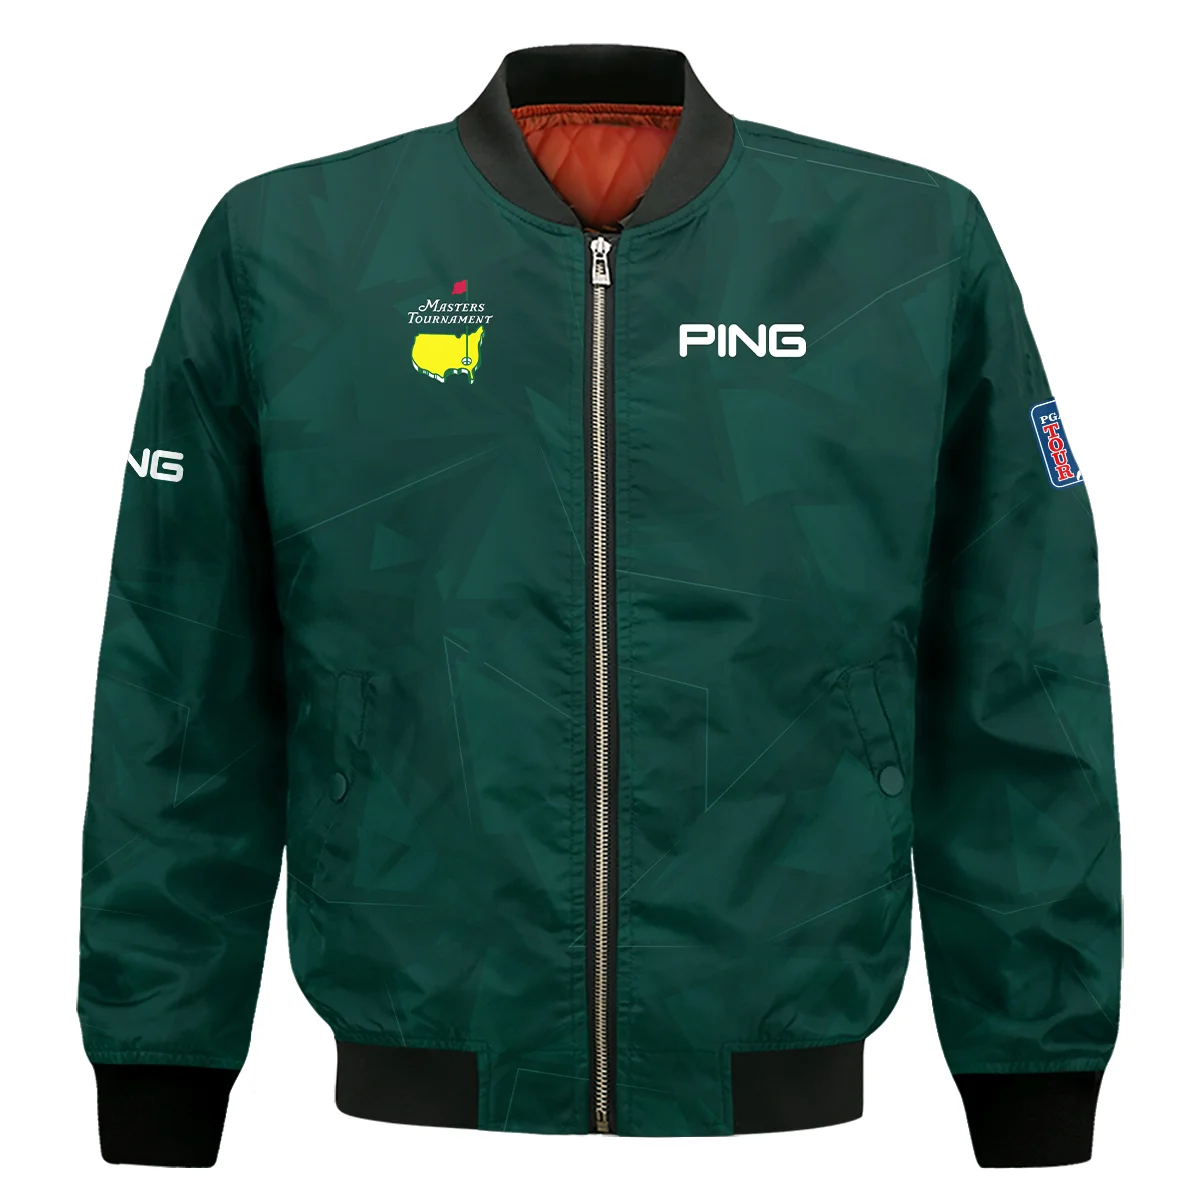 Dark Green Abstract Sport Masters Tournament Ping Bomber Jacket Style Classic Bomber Jacket